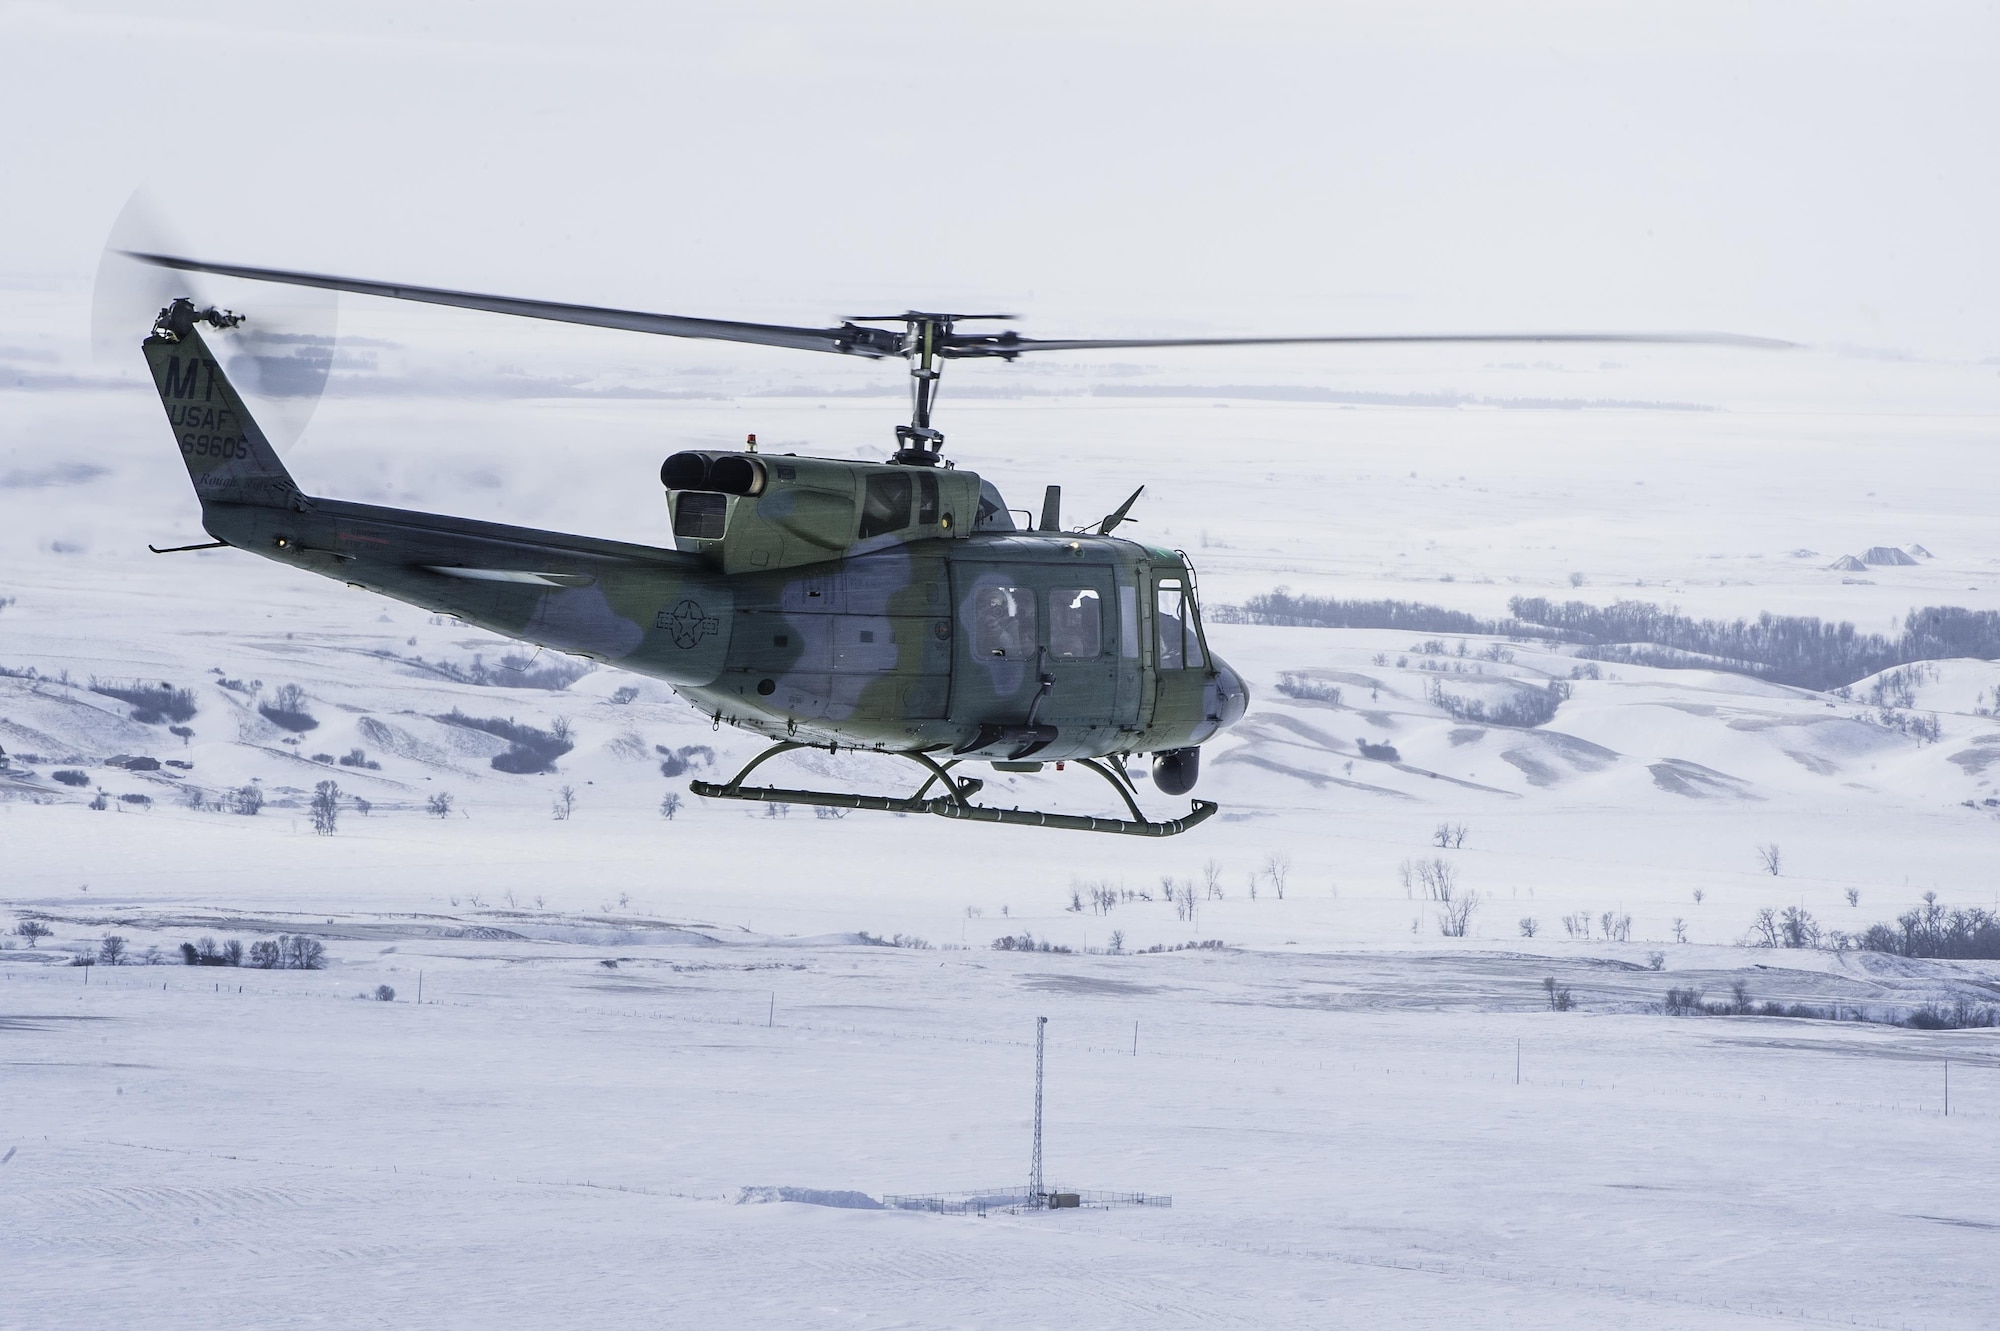 A UH-1N Iroquois from the 54th Helicopter Squadron flies over Minot Air Force Base’s missile complex, N.D., Jan. 25, 2017. The purpose of the flight was to perform training maneuvers and complete a security sweep of 91st Missile Wing launch facilities.  The 54th HS’s fleet is critical in providing support to 91st MW Airmen and assets in the missile complex. (U.S. Air Force photo/Airman 1st Class J.T. Armstrong)